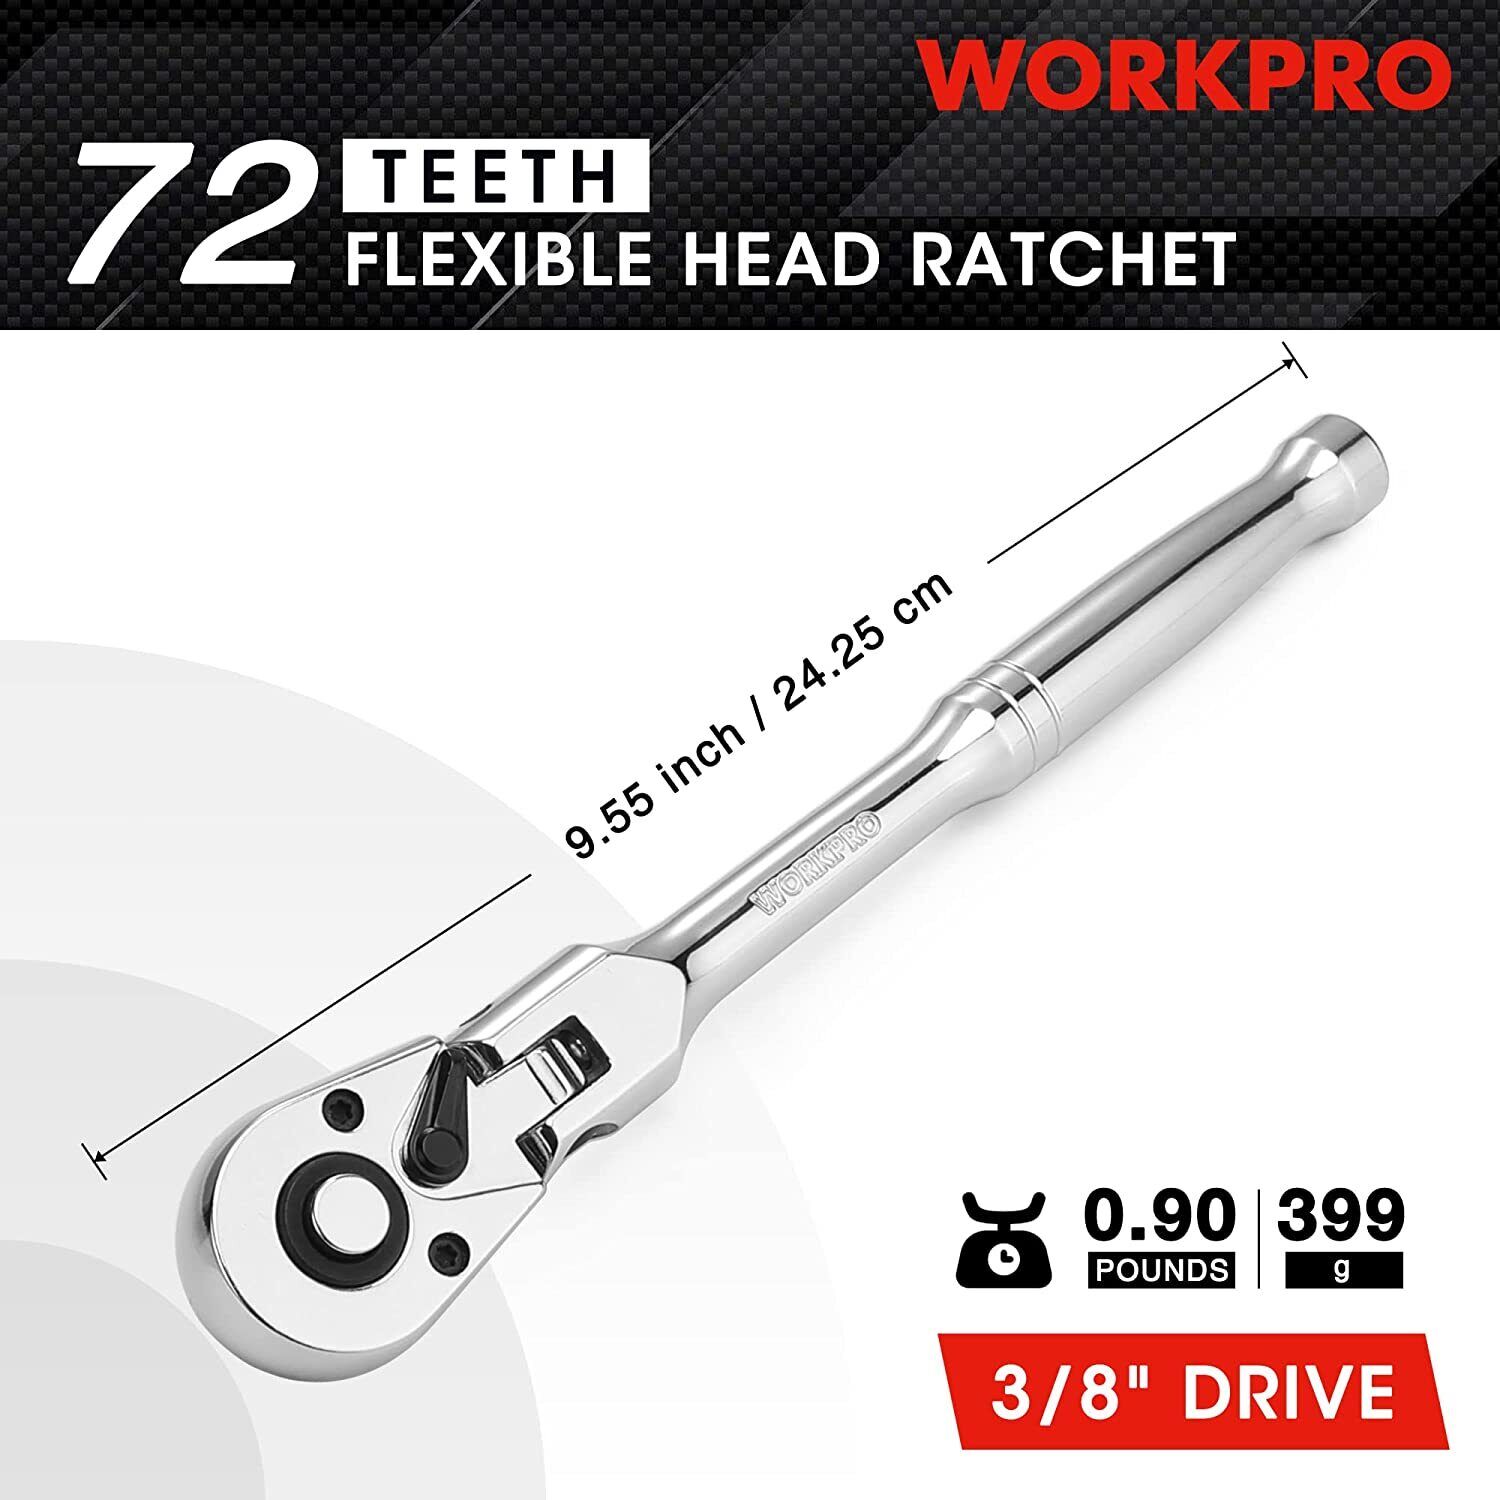 WORKPRO 3/8" Drive 72-Tooth Flex Head Ratchet Chromium Plated Quick Release New